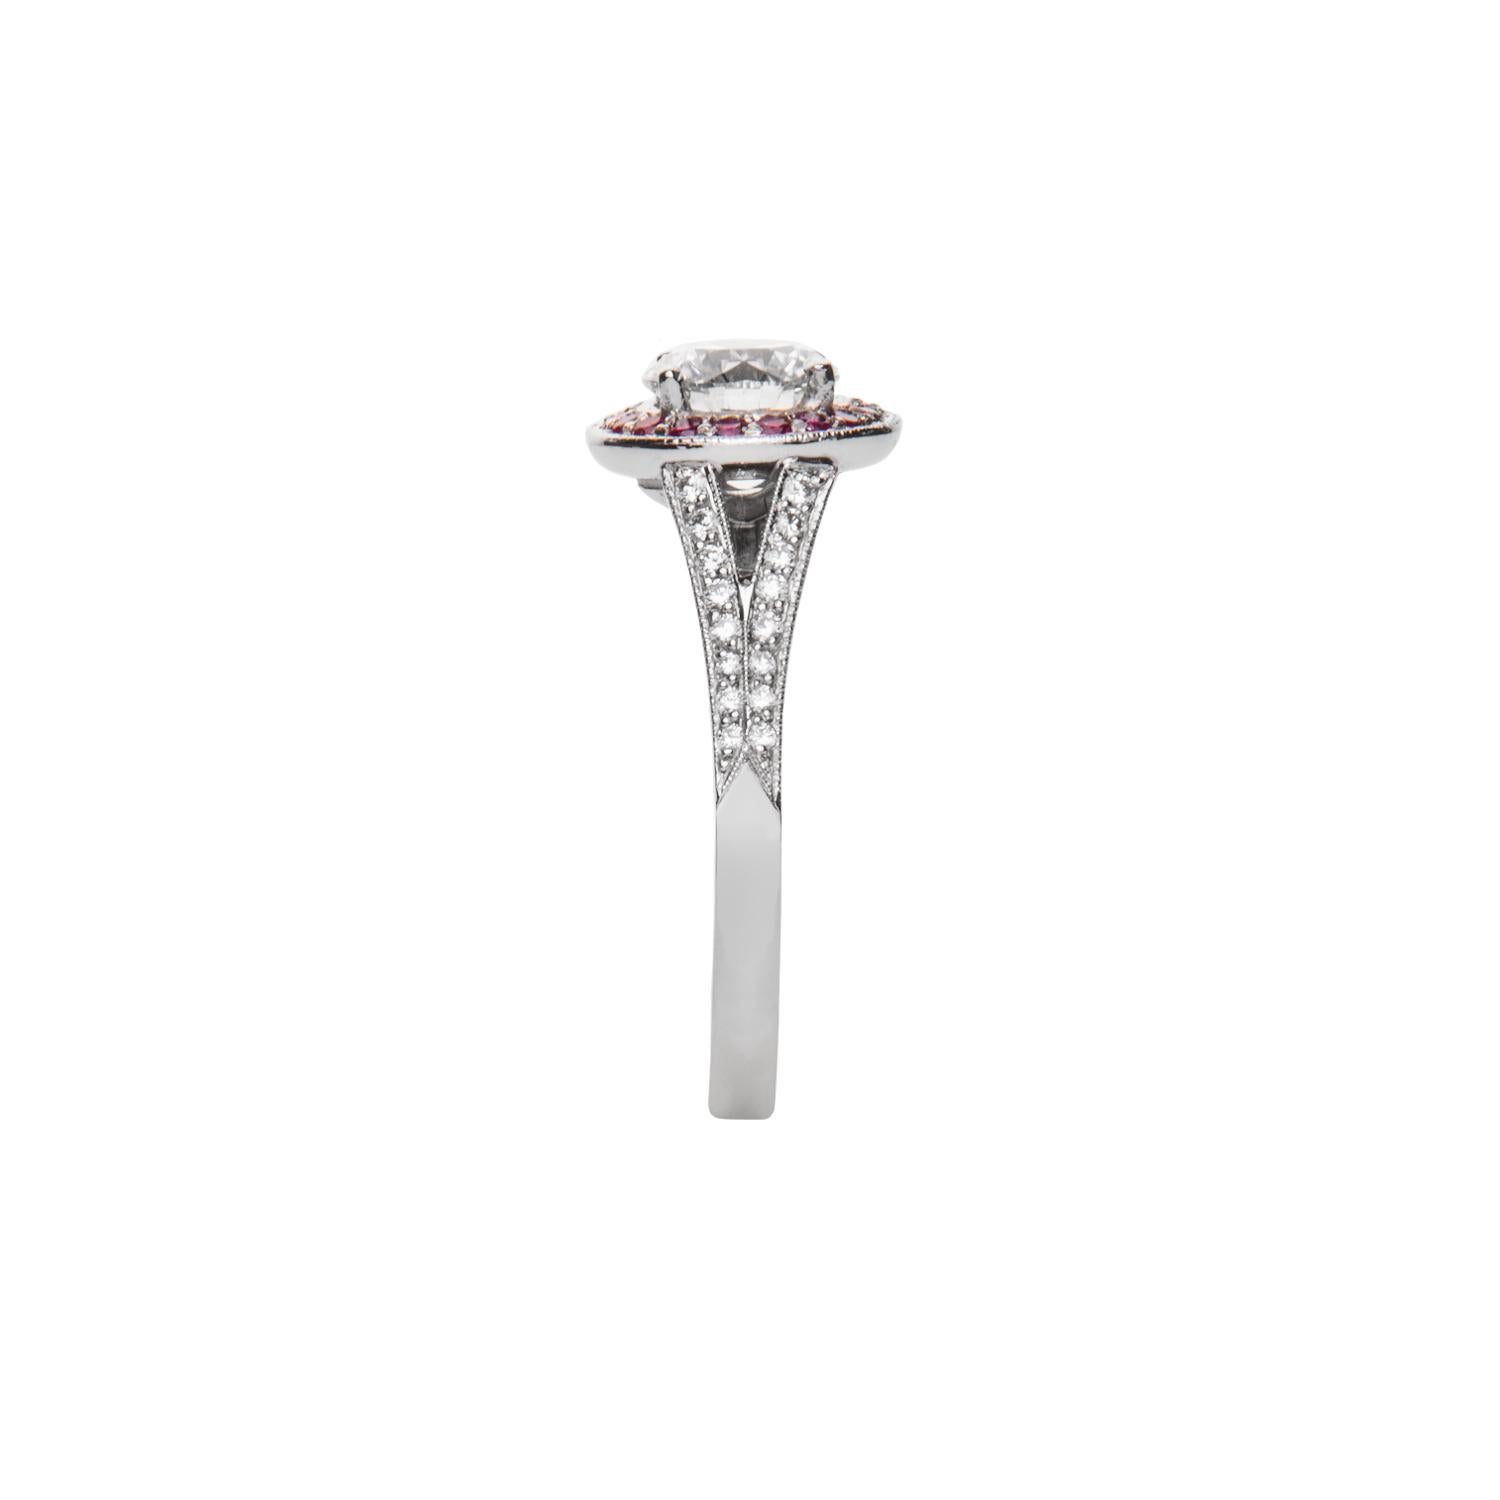 1.02 Carat Round Diamond Ruby Cluster Ring Platinum Natalie Barney In New Condition For Sale In Crows Nest, NSW